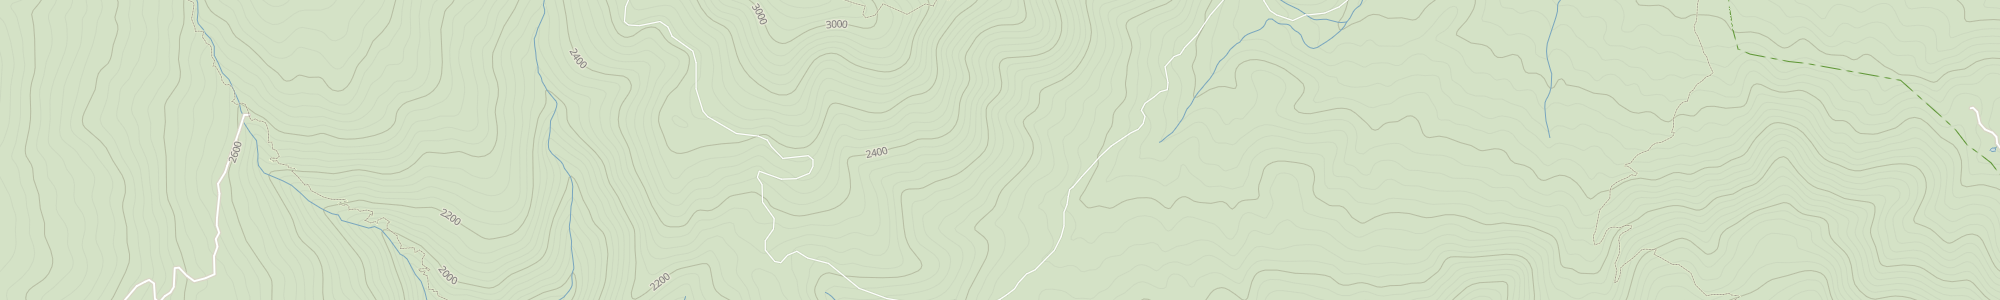 Designing a topo map for search and rescue